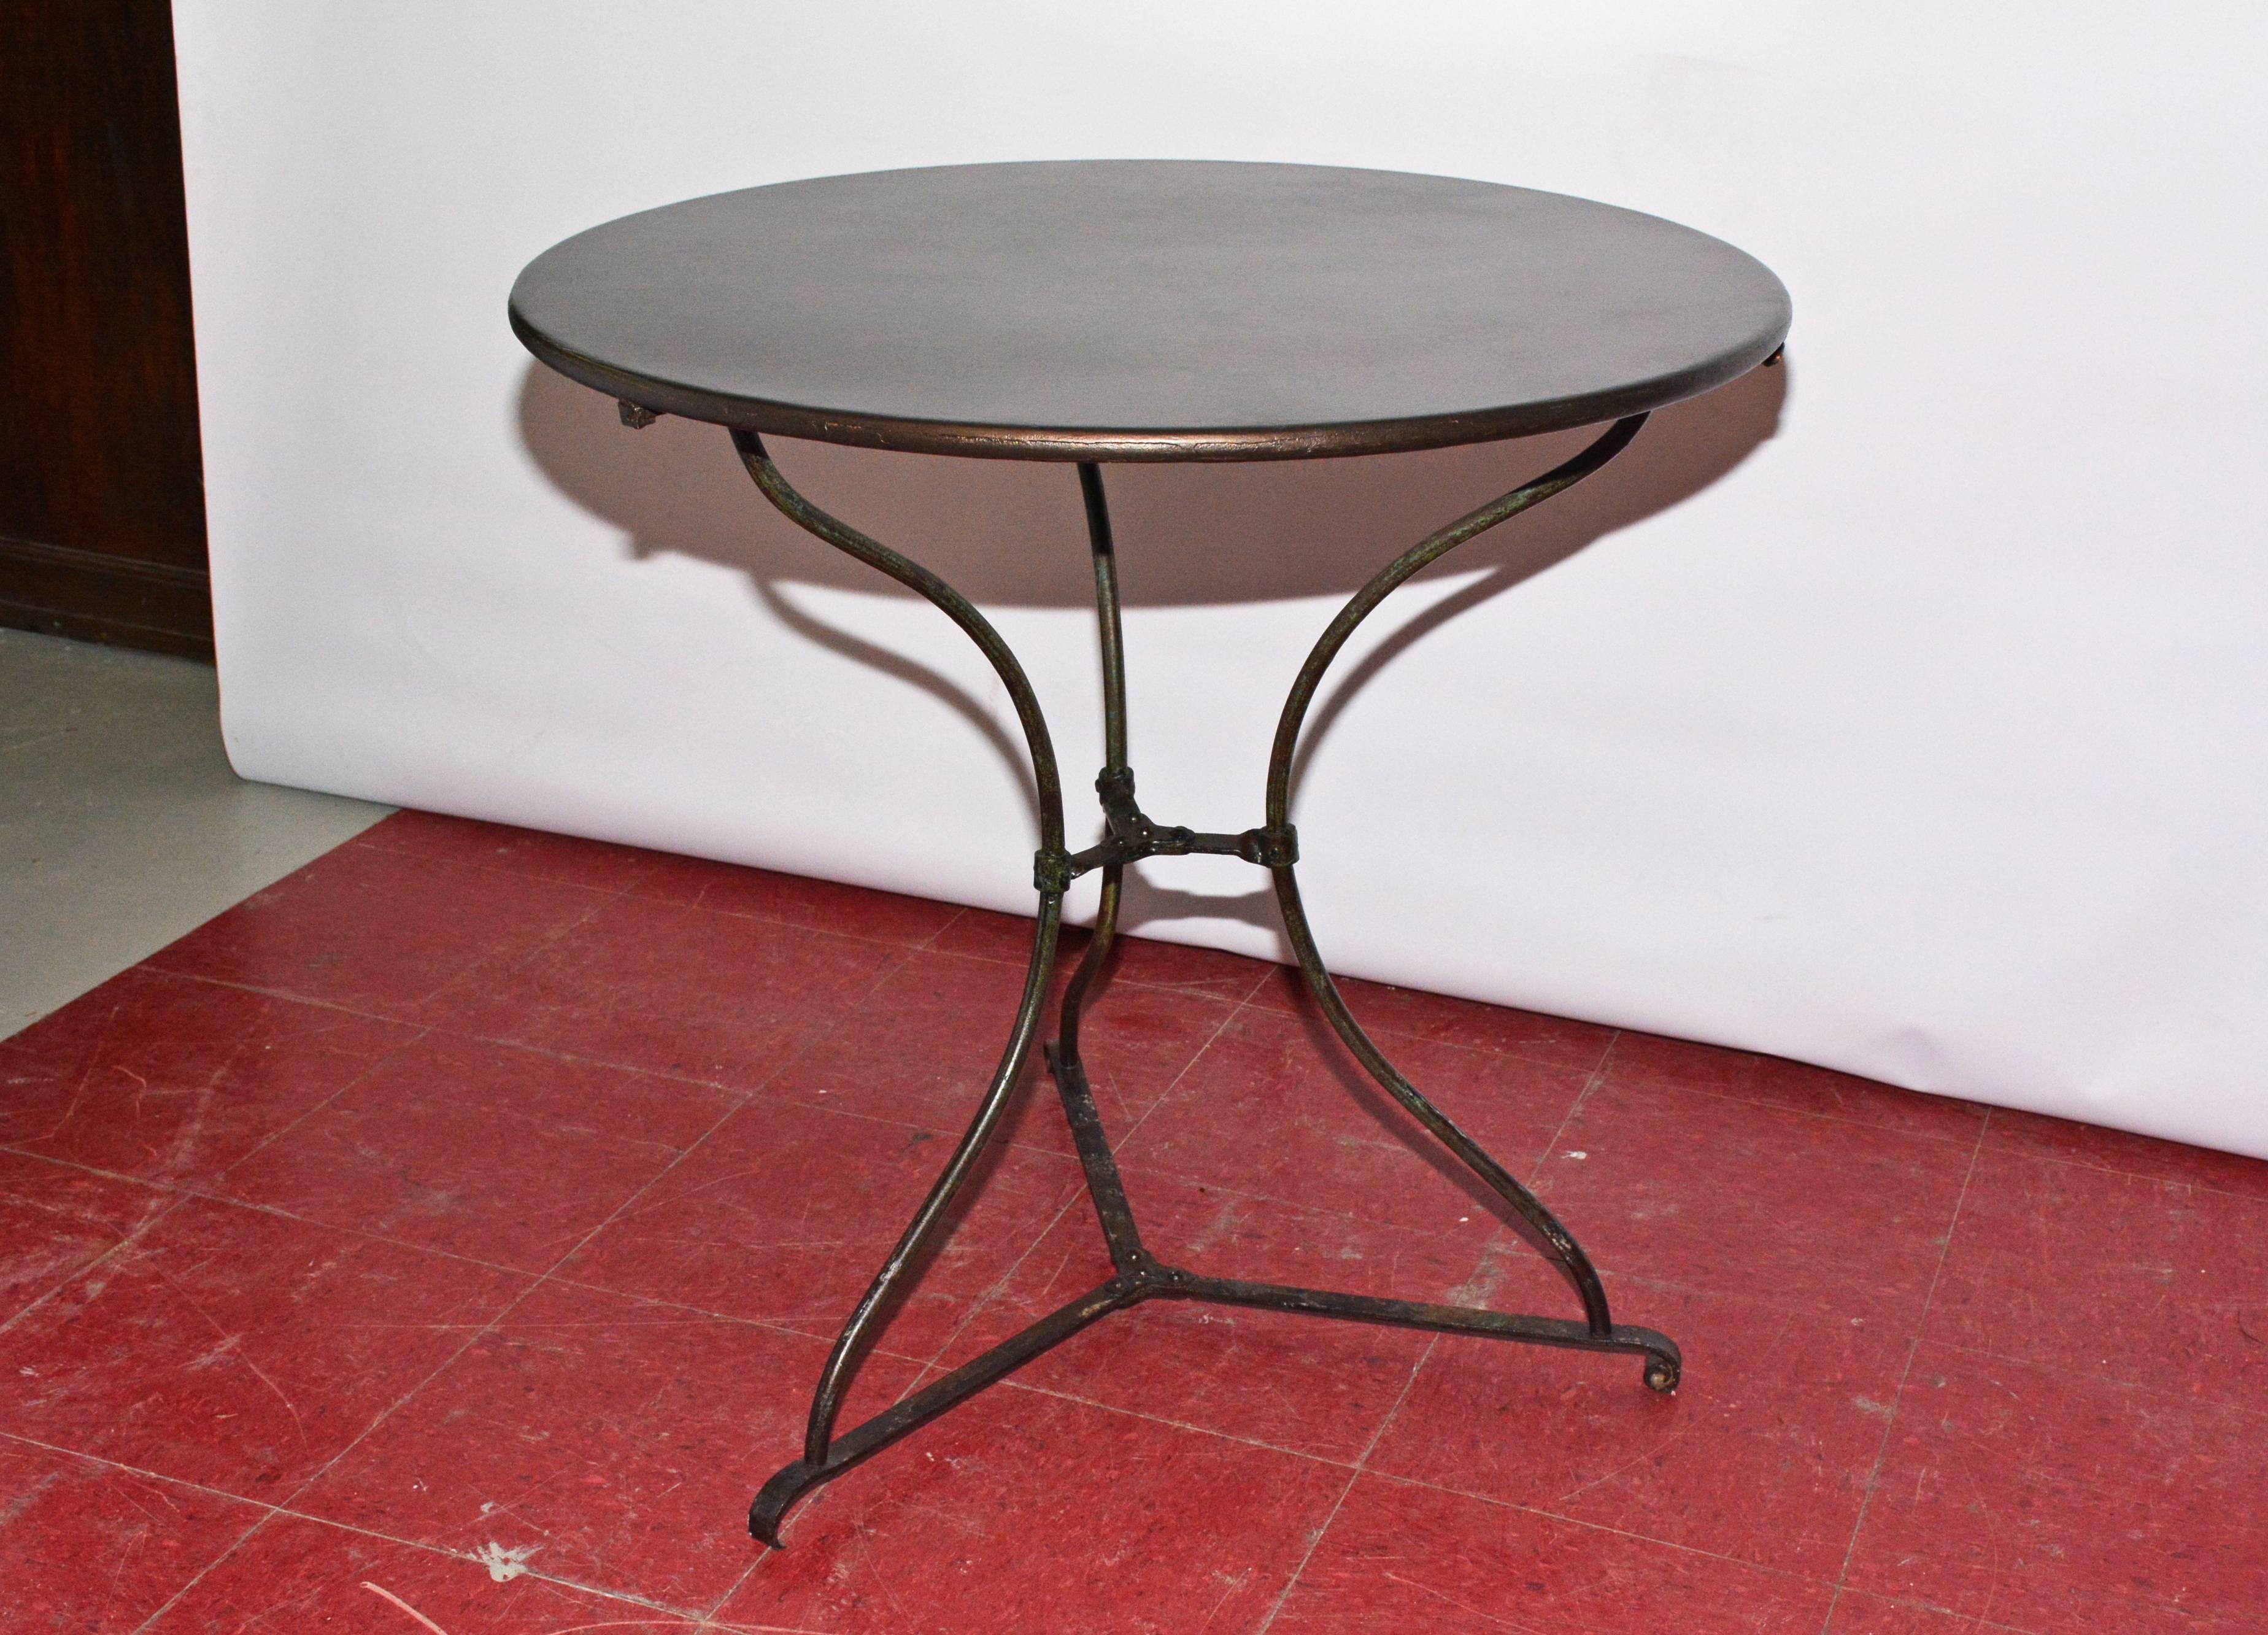 Restored 19th century iron bistro cafe table has a rounded edge with three curved legs joined by an X-form stretcher. Can be used as side table, bedside or sofa table. Also large enough to be used as small kitchen table.